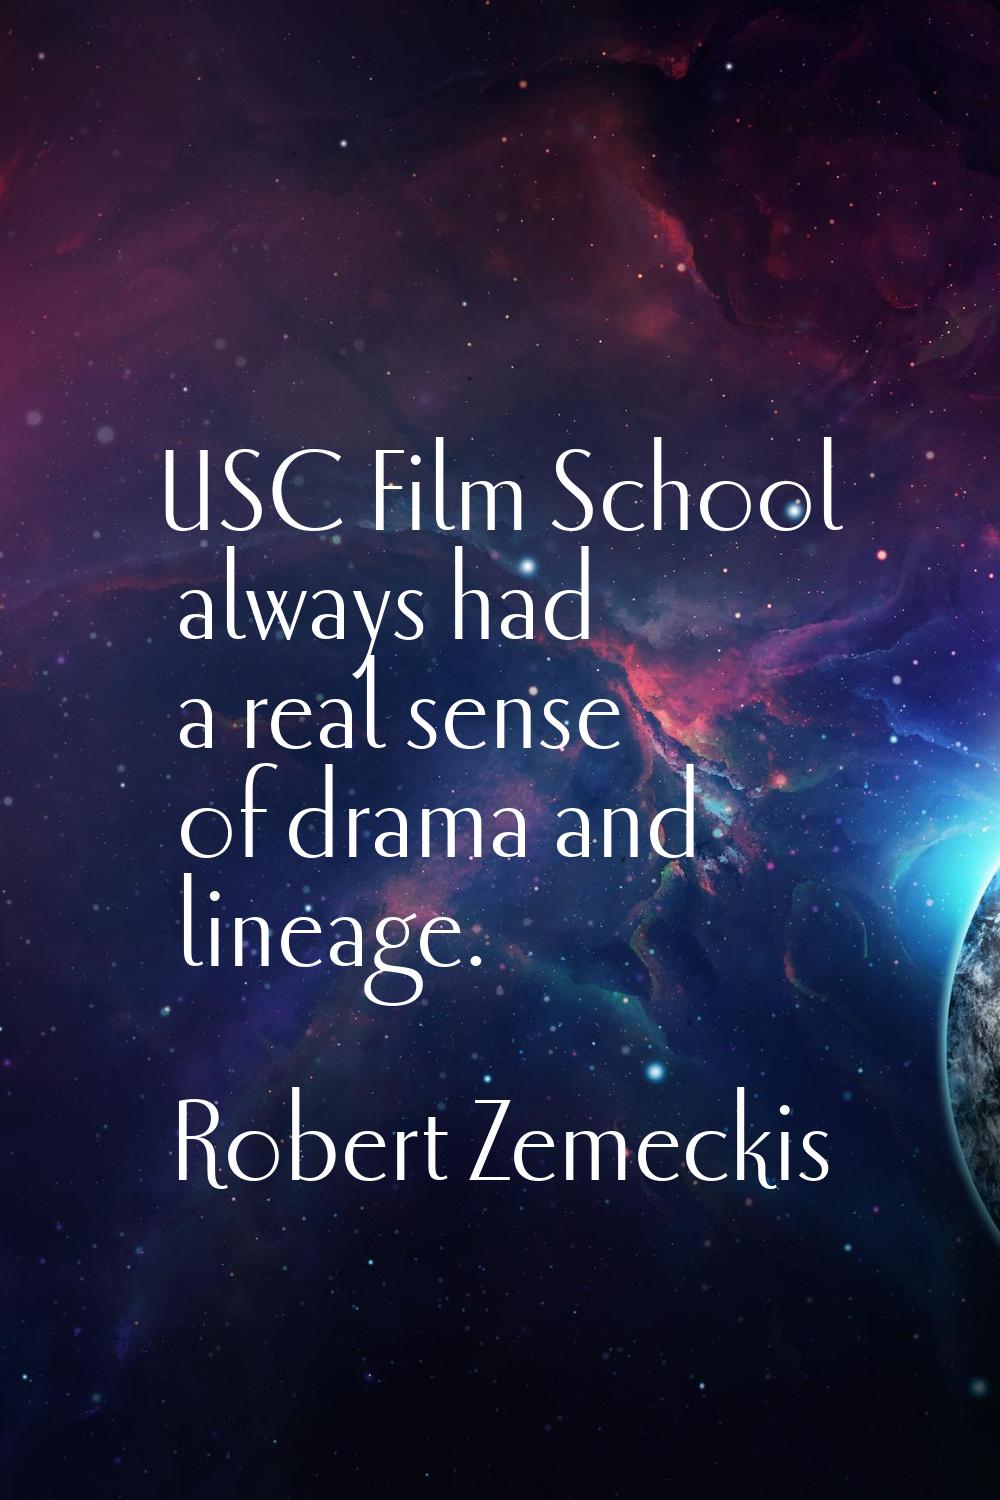 USC Film School always had a real sense of drama and lineage.